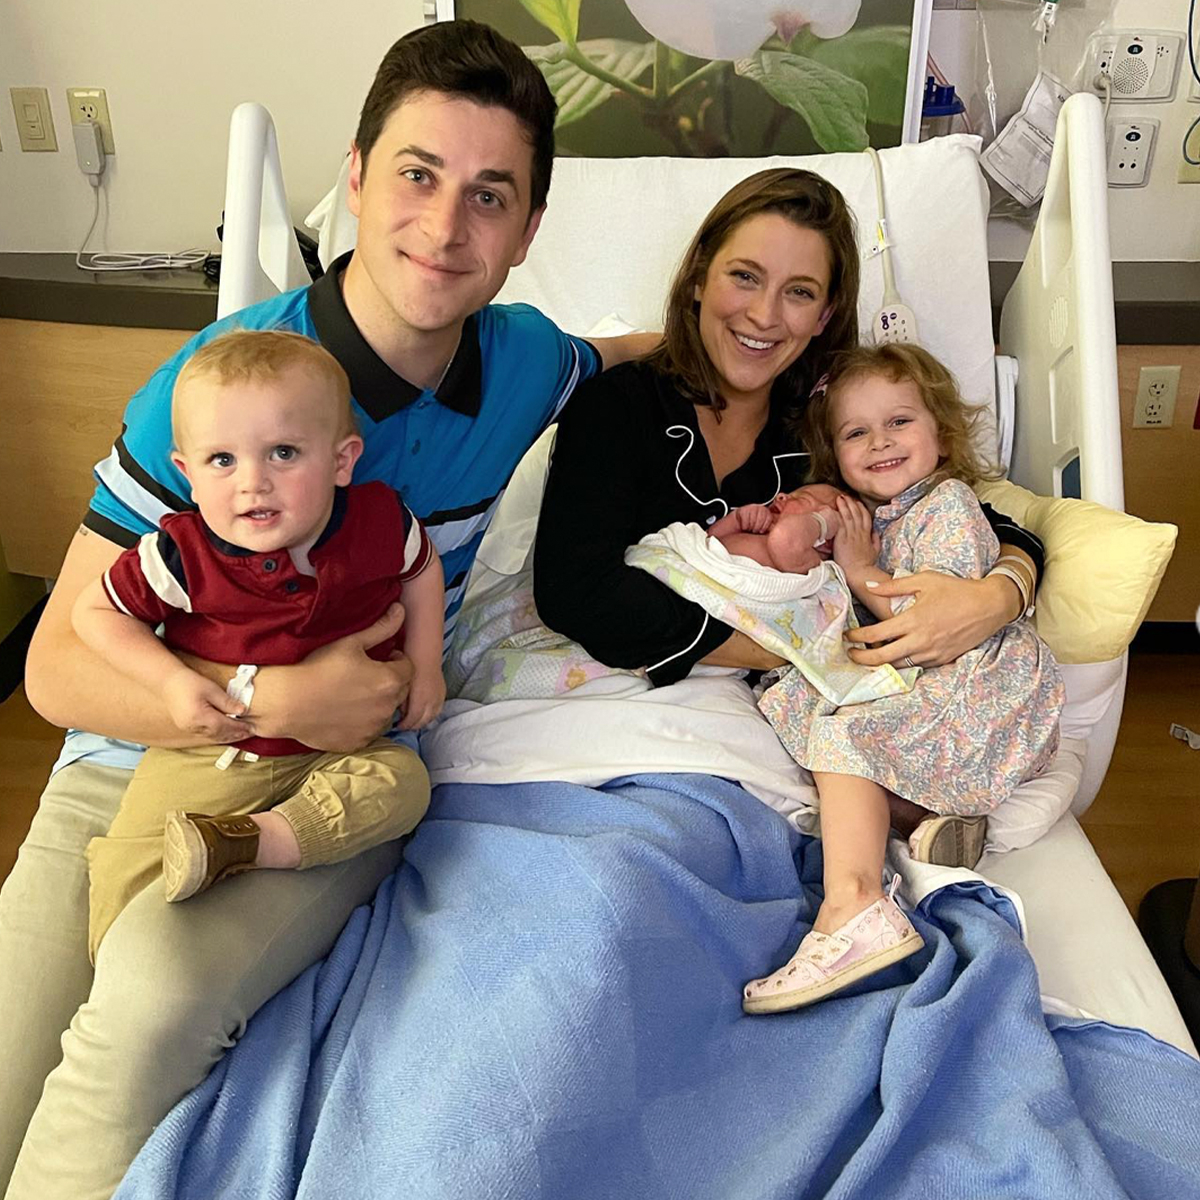 Wizards of Waverly Place David Henrie Welcomes Baby No. 3